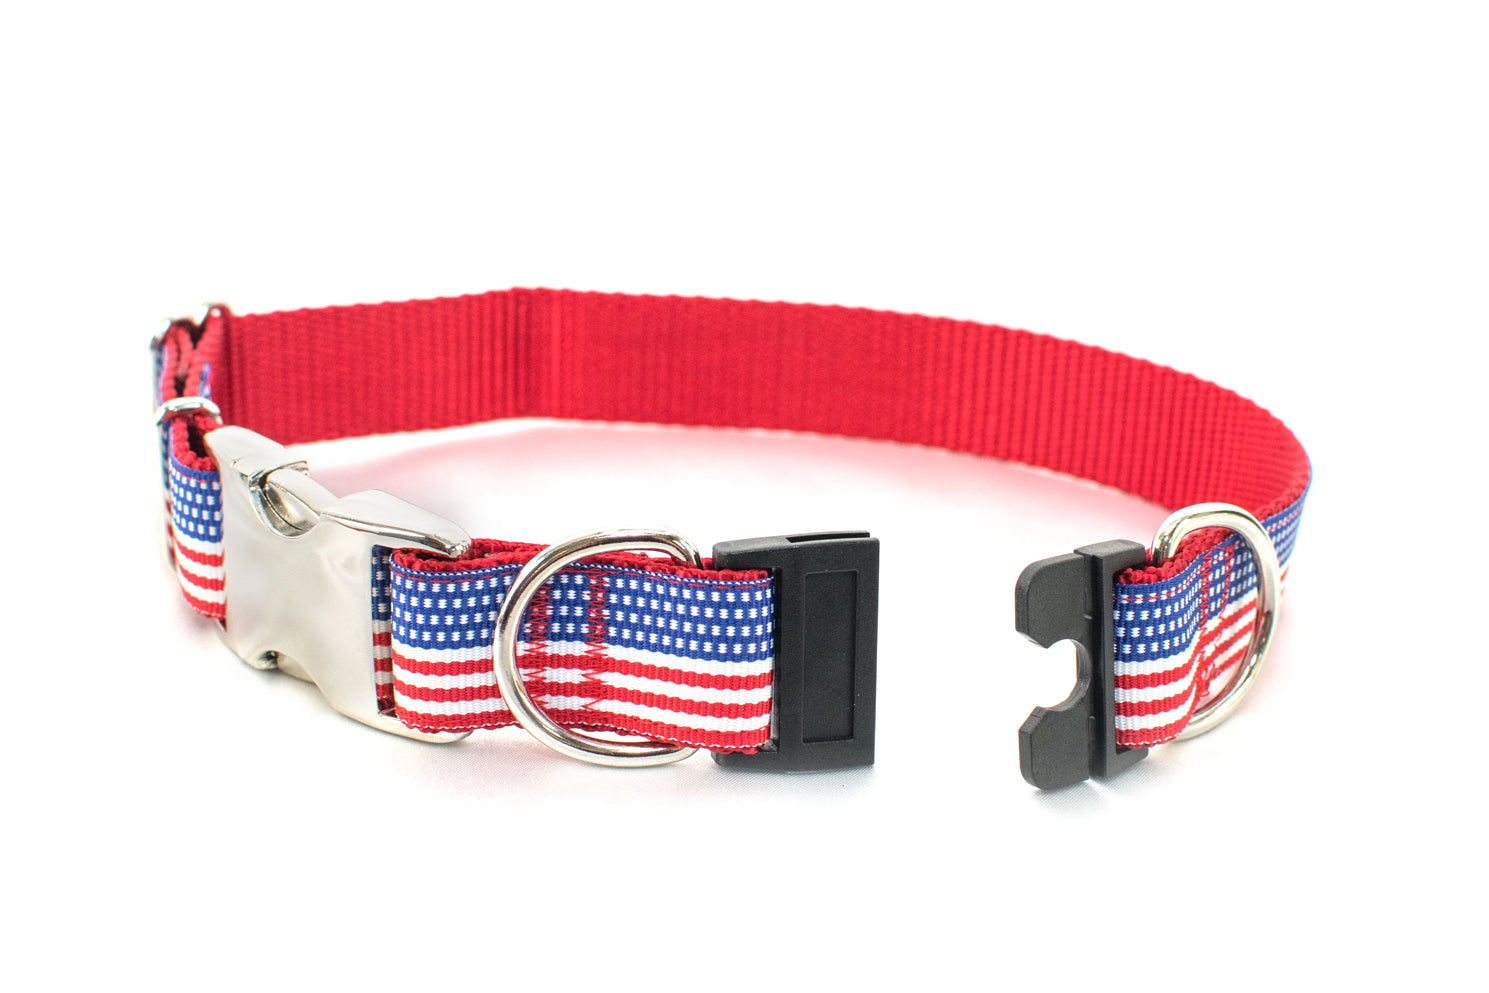 Choose-a-Print 1" BreakAway Dog Collar with Optional Personalization - Fox Valley Dog Collars